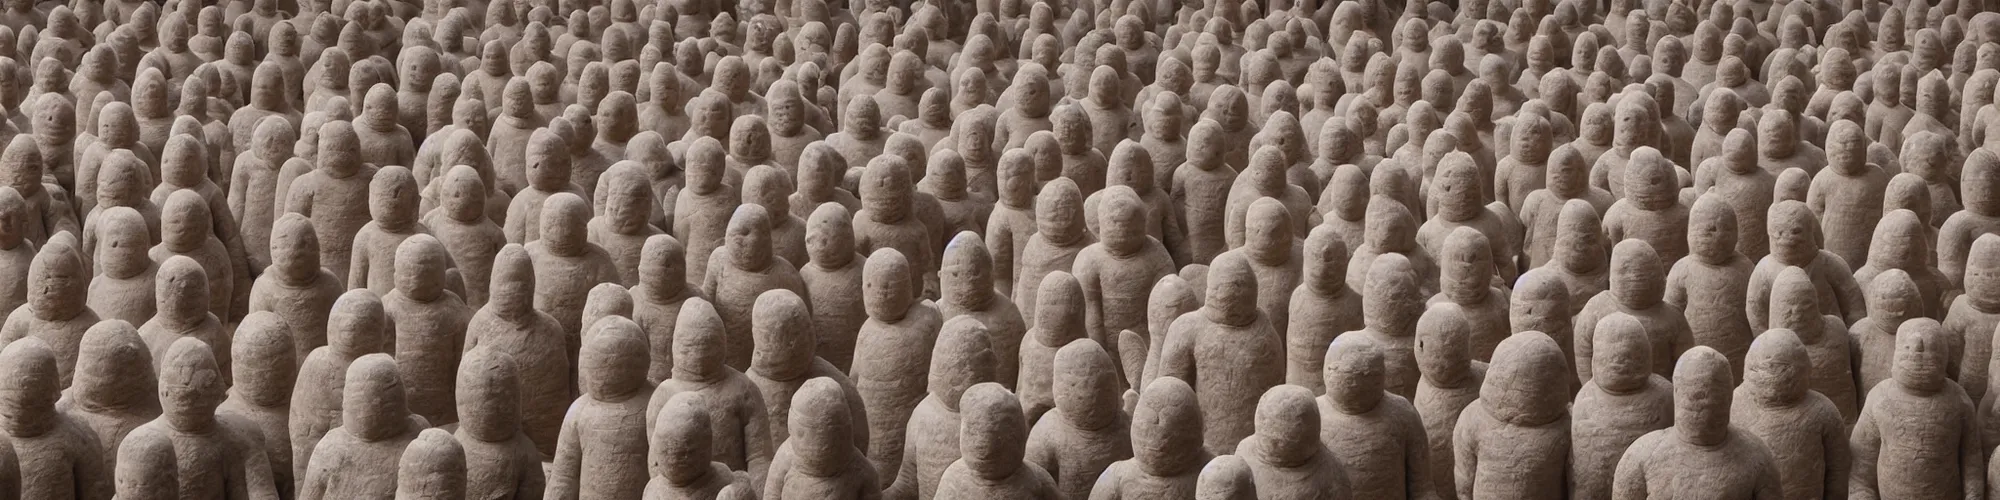 Prompt: hundreds of humans. A sea of humans. interconnected flesh. Melting clay golem humans. Dungeons&Dragons: Lemure. Lemure creature. Demonic scene. Many humans intertwined and woven together. Michelin Man puffy. Bodies and forms amesh. Terracotta army. Extremely unsettling artwork. Clay sculpture by Alberto Giacometti.